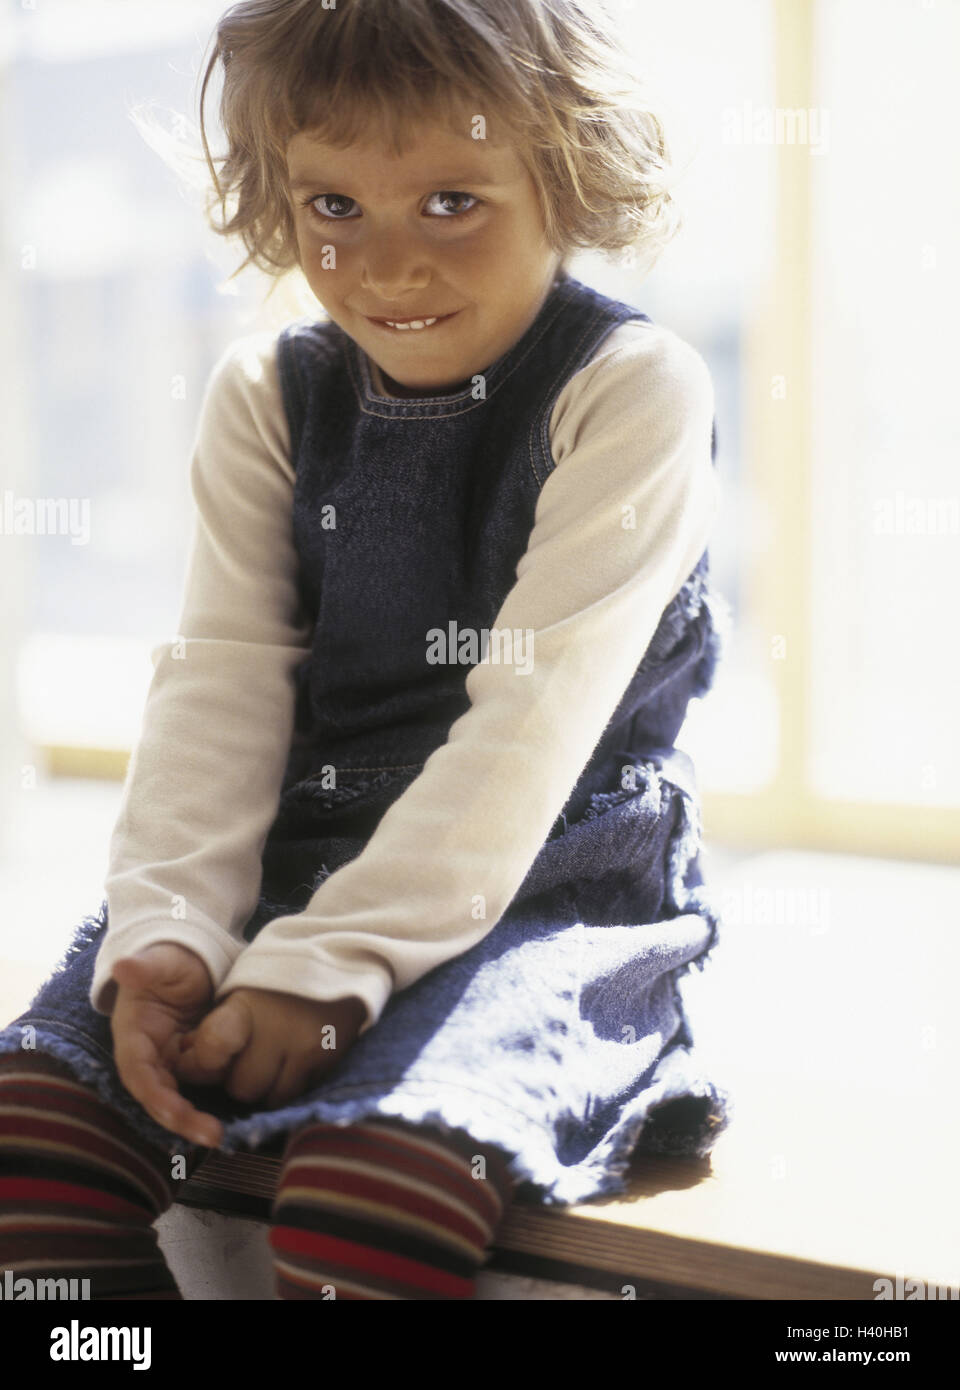 Girls, shyly, smile, windowsill sit, child, 5 - 7 years, blond, jeans dress, dress, sock trousers, curled, leisure time, childhood, happy, shyness, curled Stock Photo